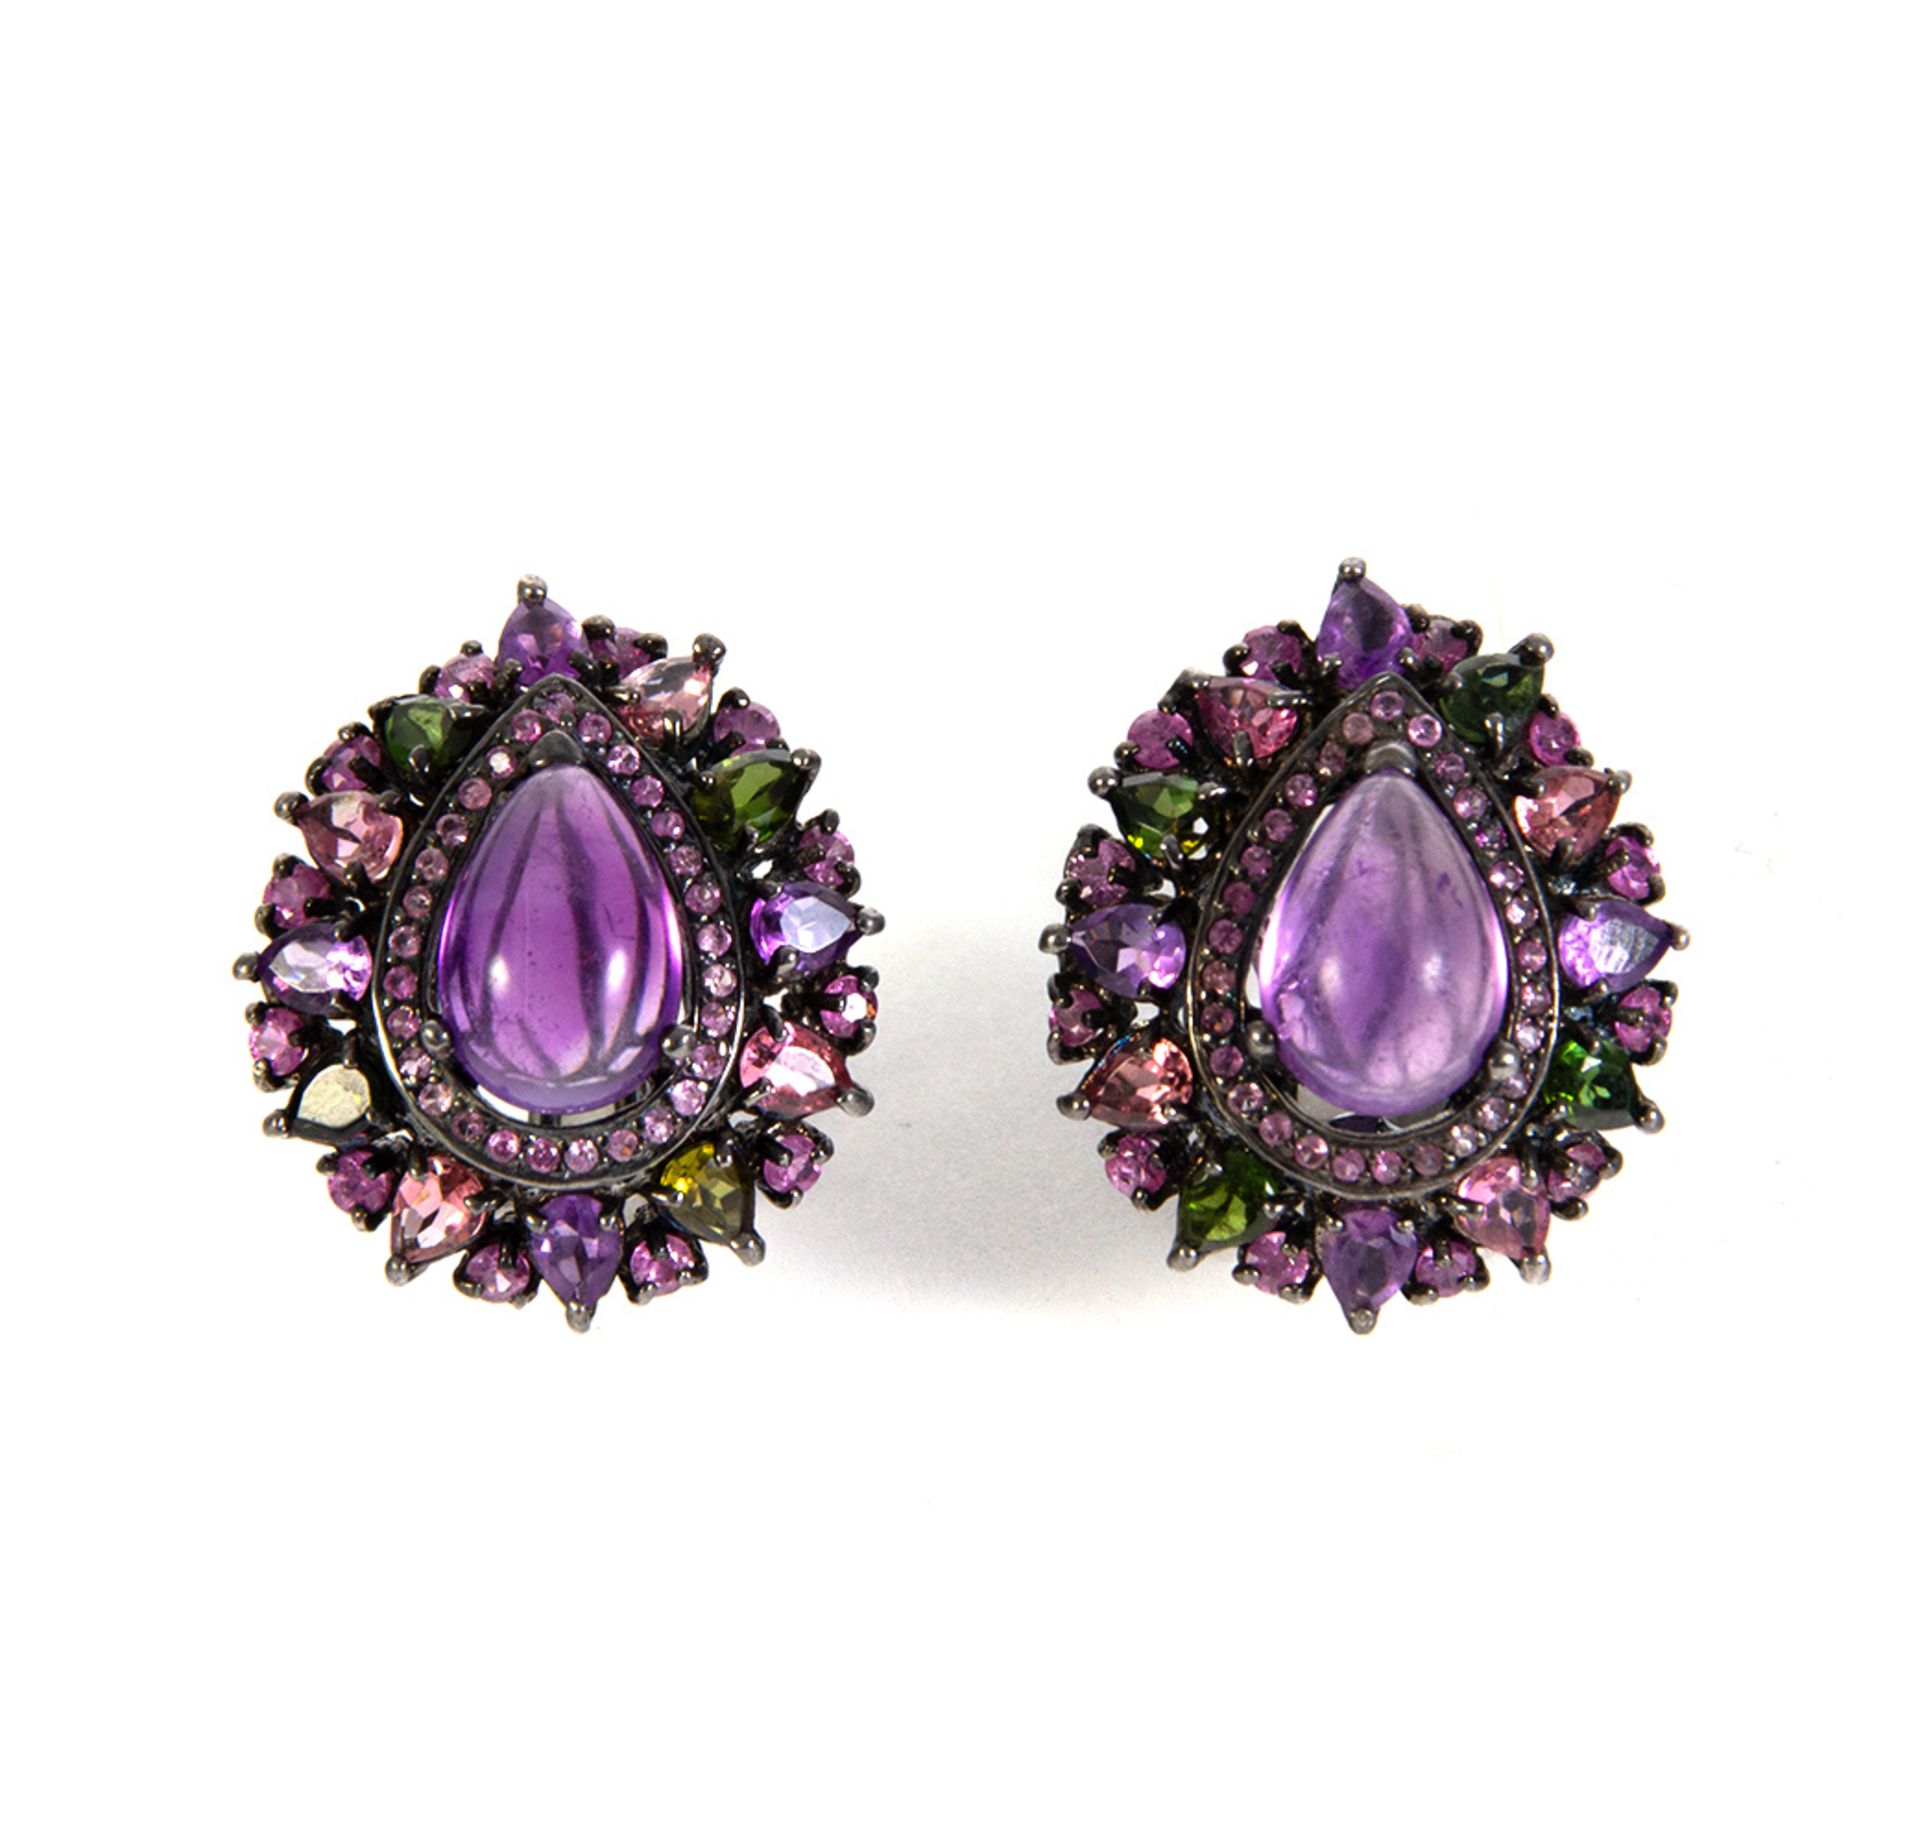 blued silver earring, cabochon cut amethyst, pink sapphires and green garnets in different sizes.